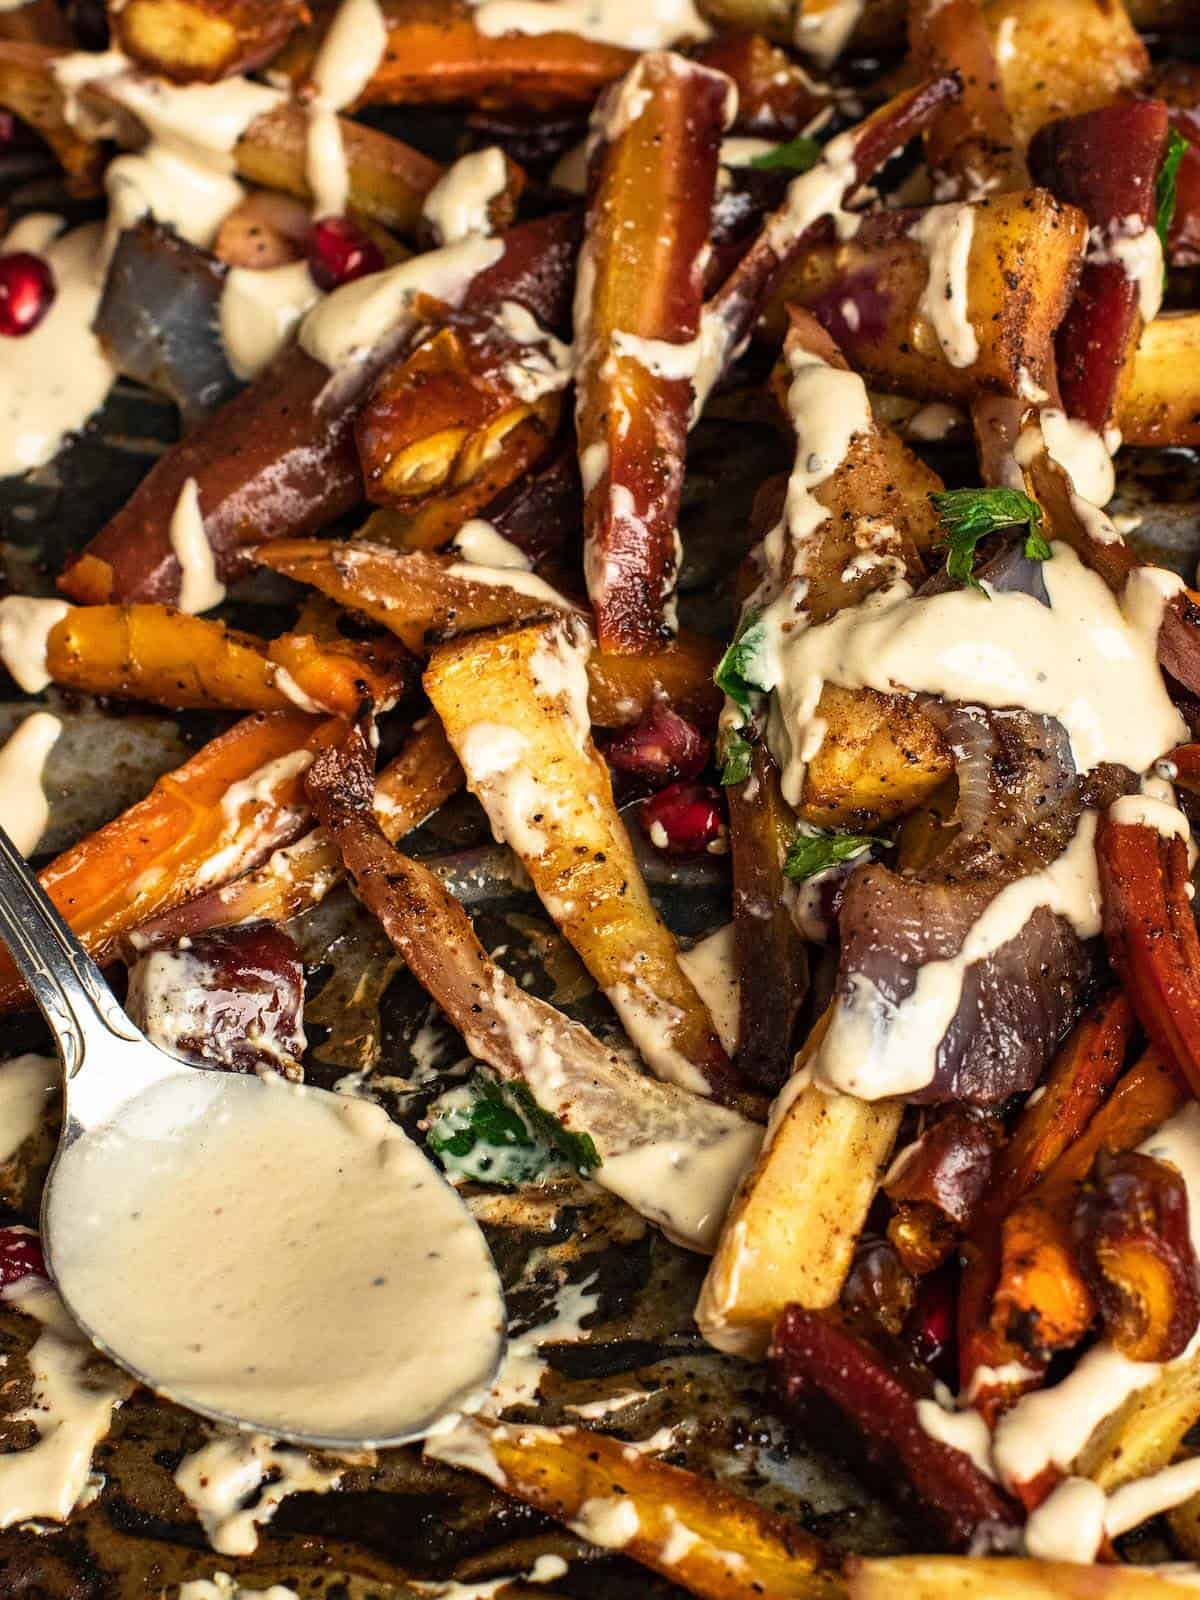 Roasted tzimmes with carrots and parsnips topped with tahini drizzle and pomegranate seeds.